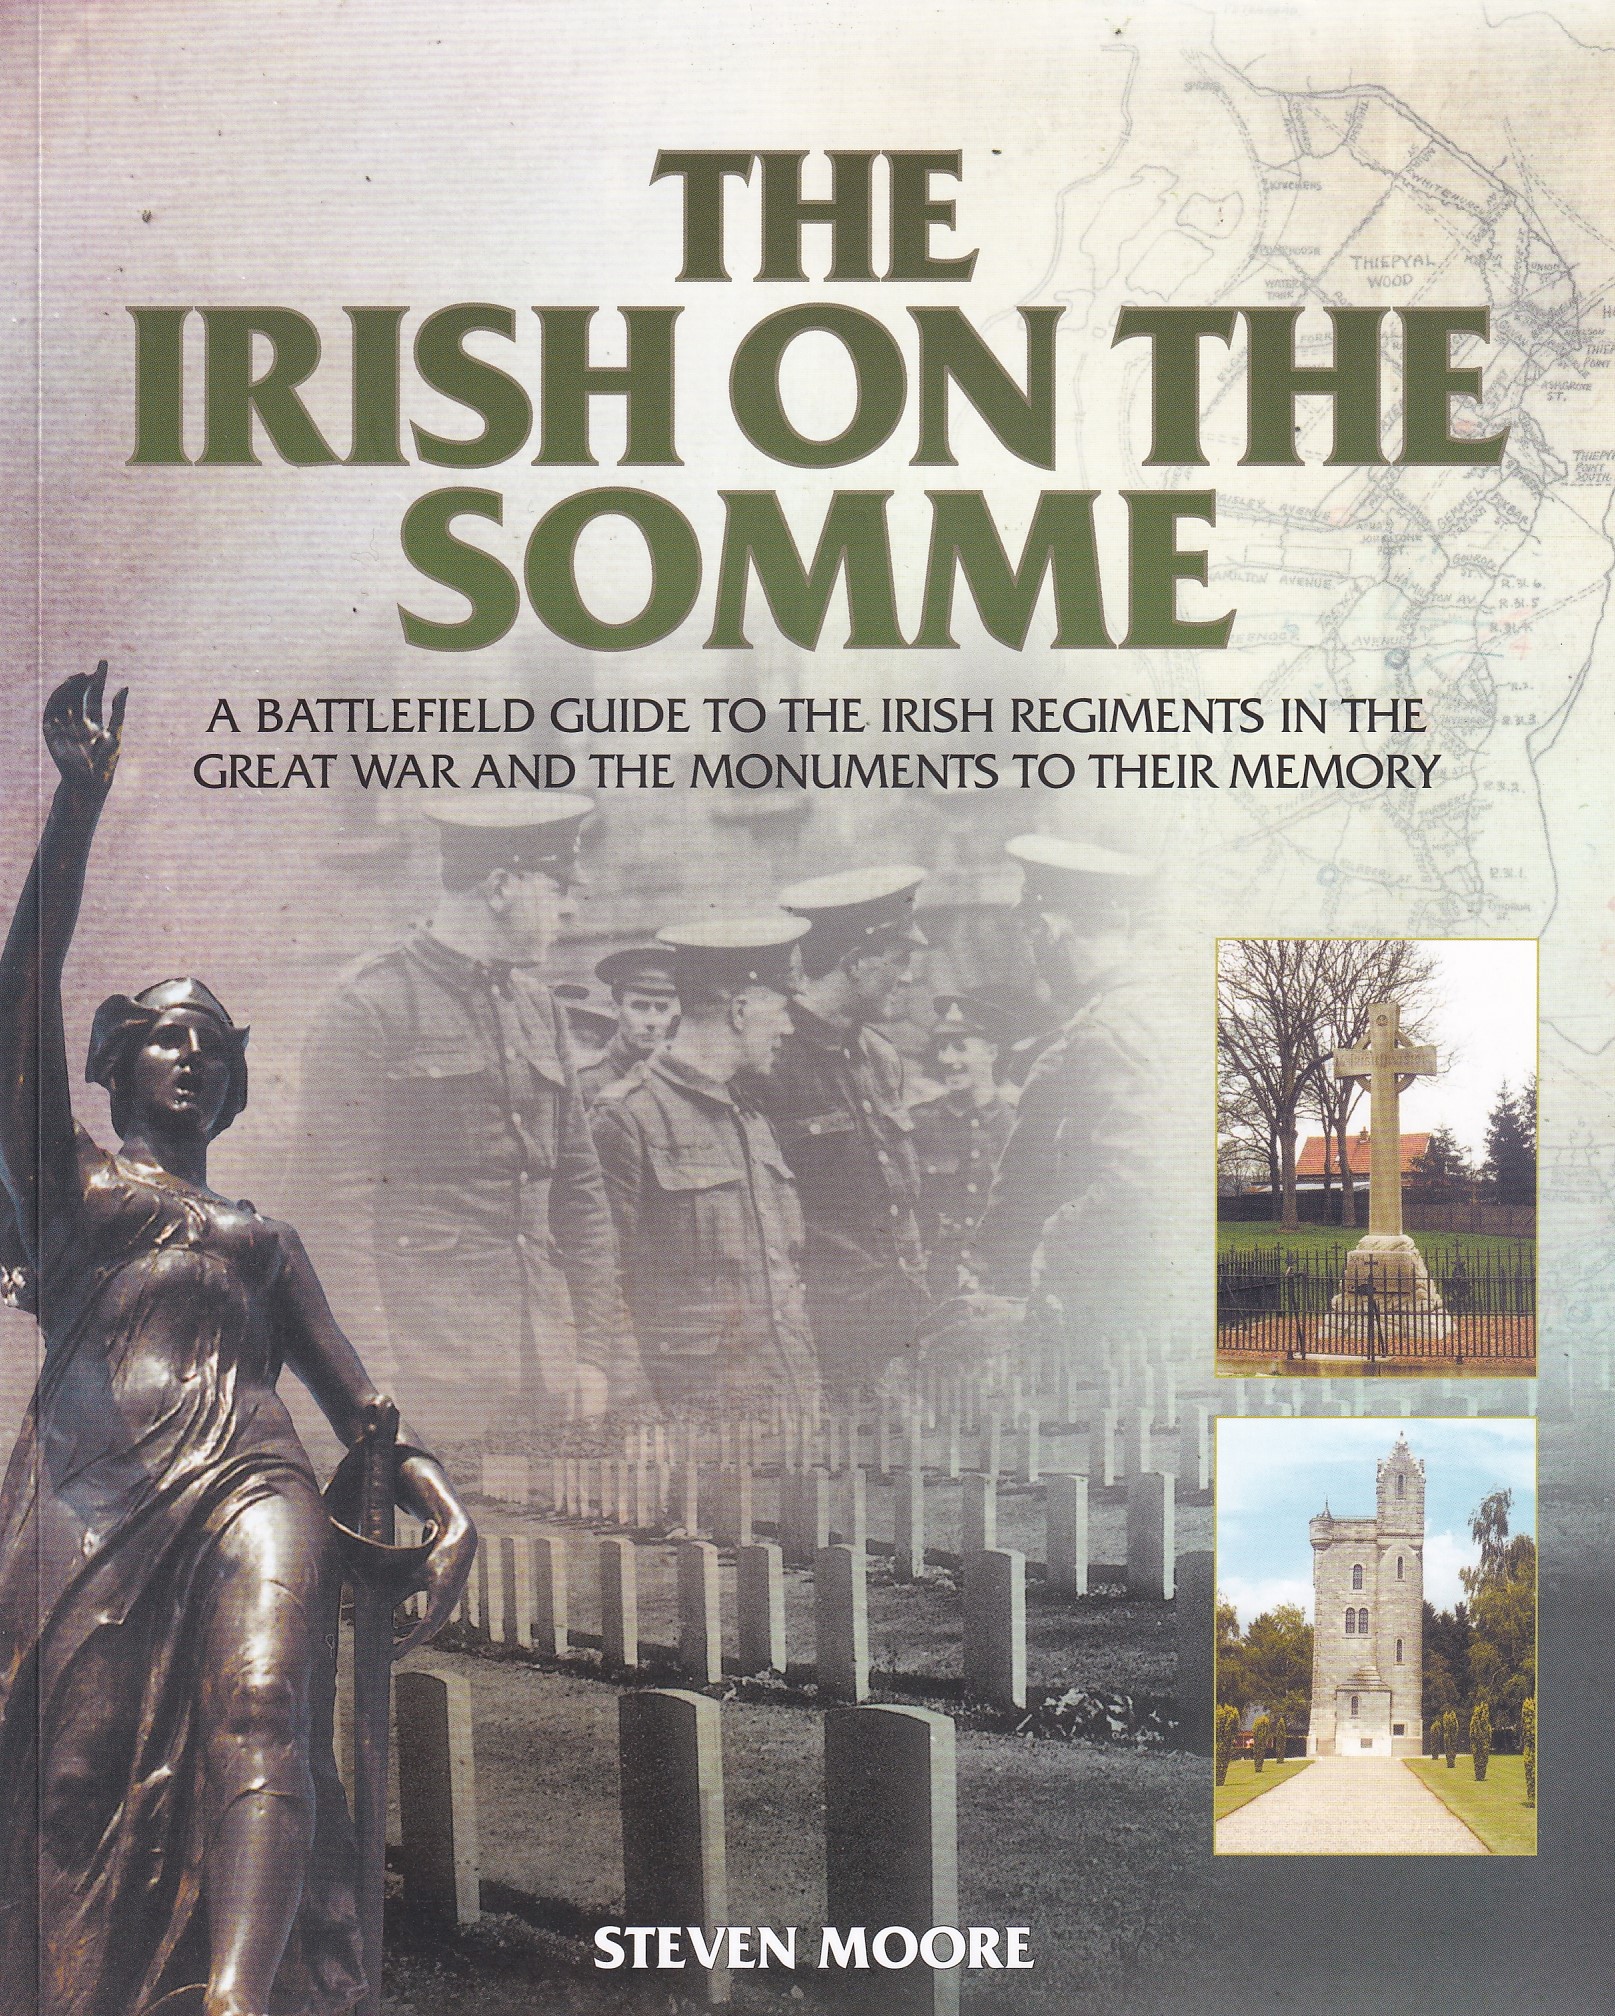 The Irish on the Somme: A Battlefield Guide to the Irish Regiments in the Great War and the Monuments to Their Memory | Moore, Steven | Charlie Byrne's